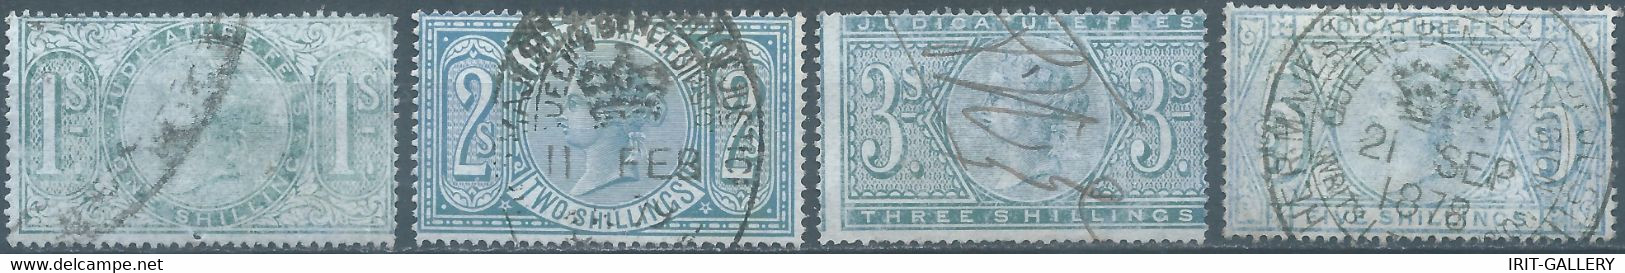 Great Britain-ENGLAND,Queen Victoria,1880-1900 Revenue Stamp Tax Fiscal,JUDICATURE FEES,1-2-3-5 Shillings,Used - Fiscali